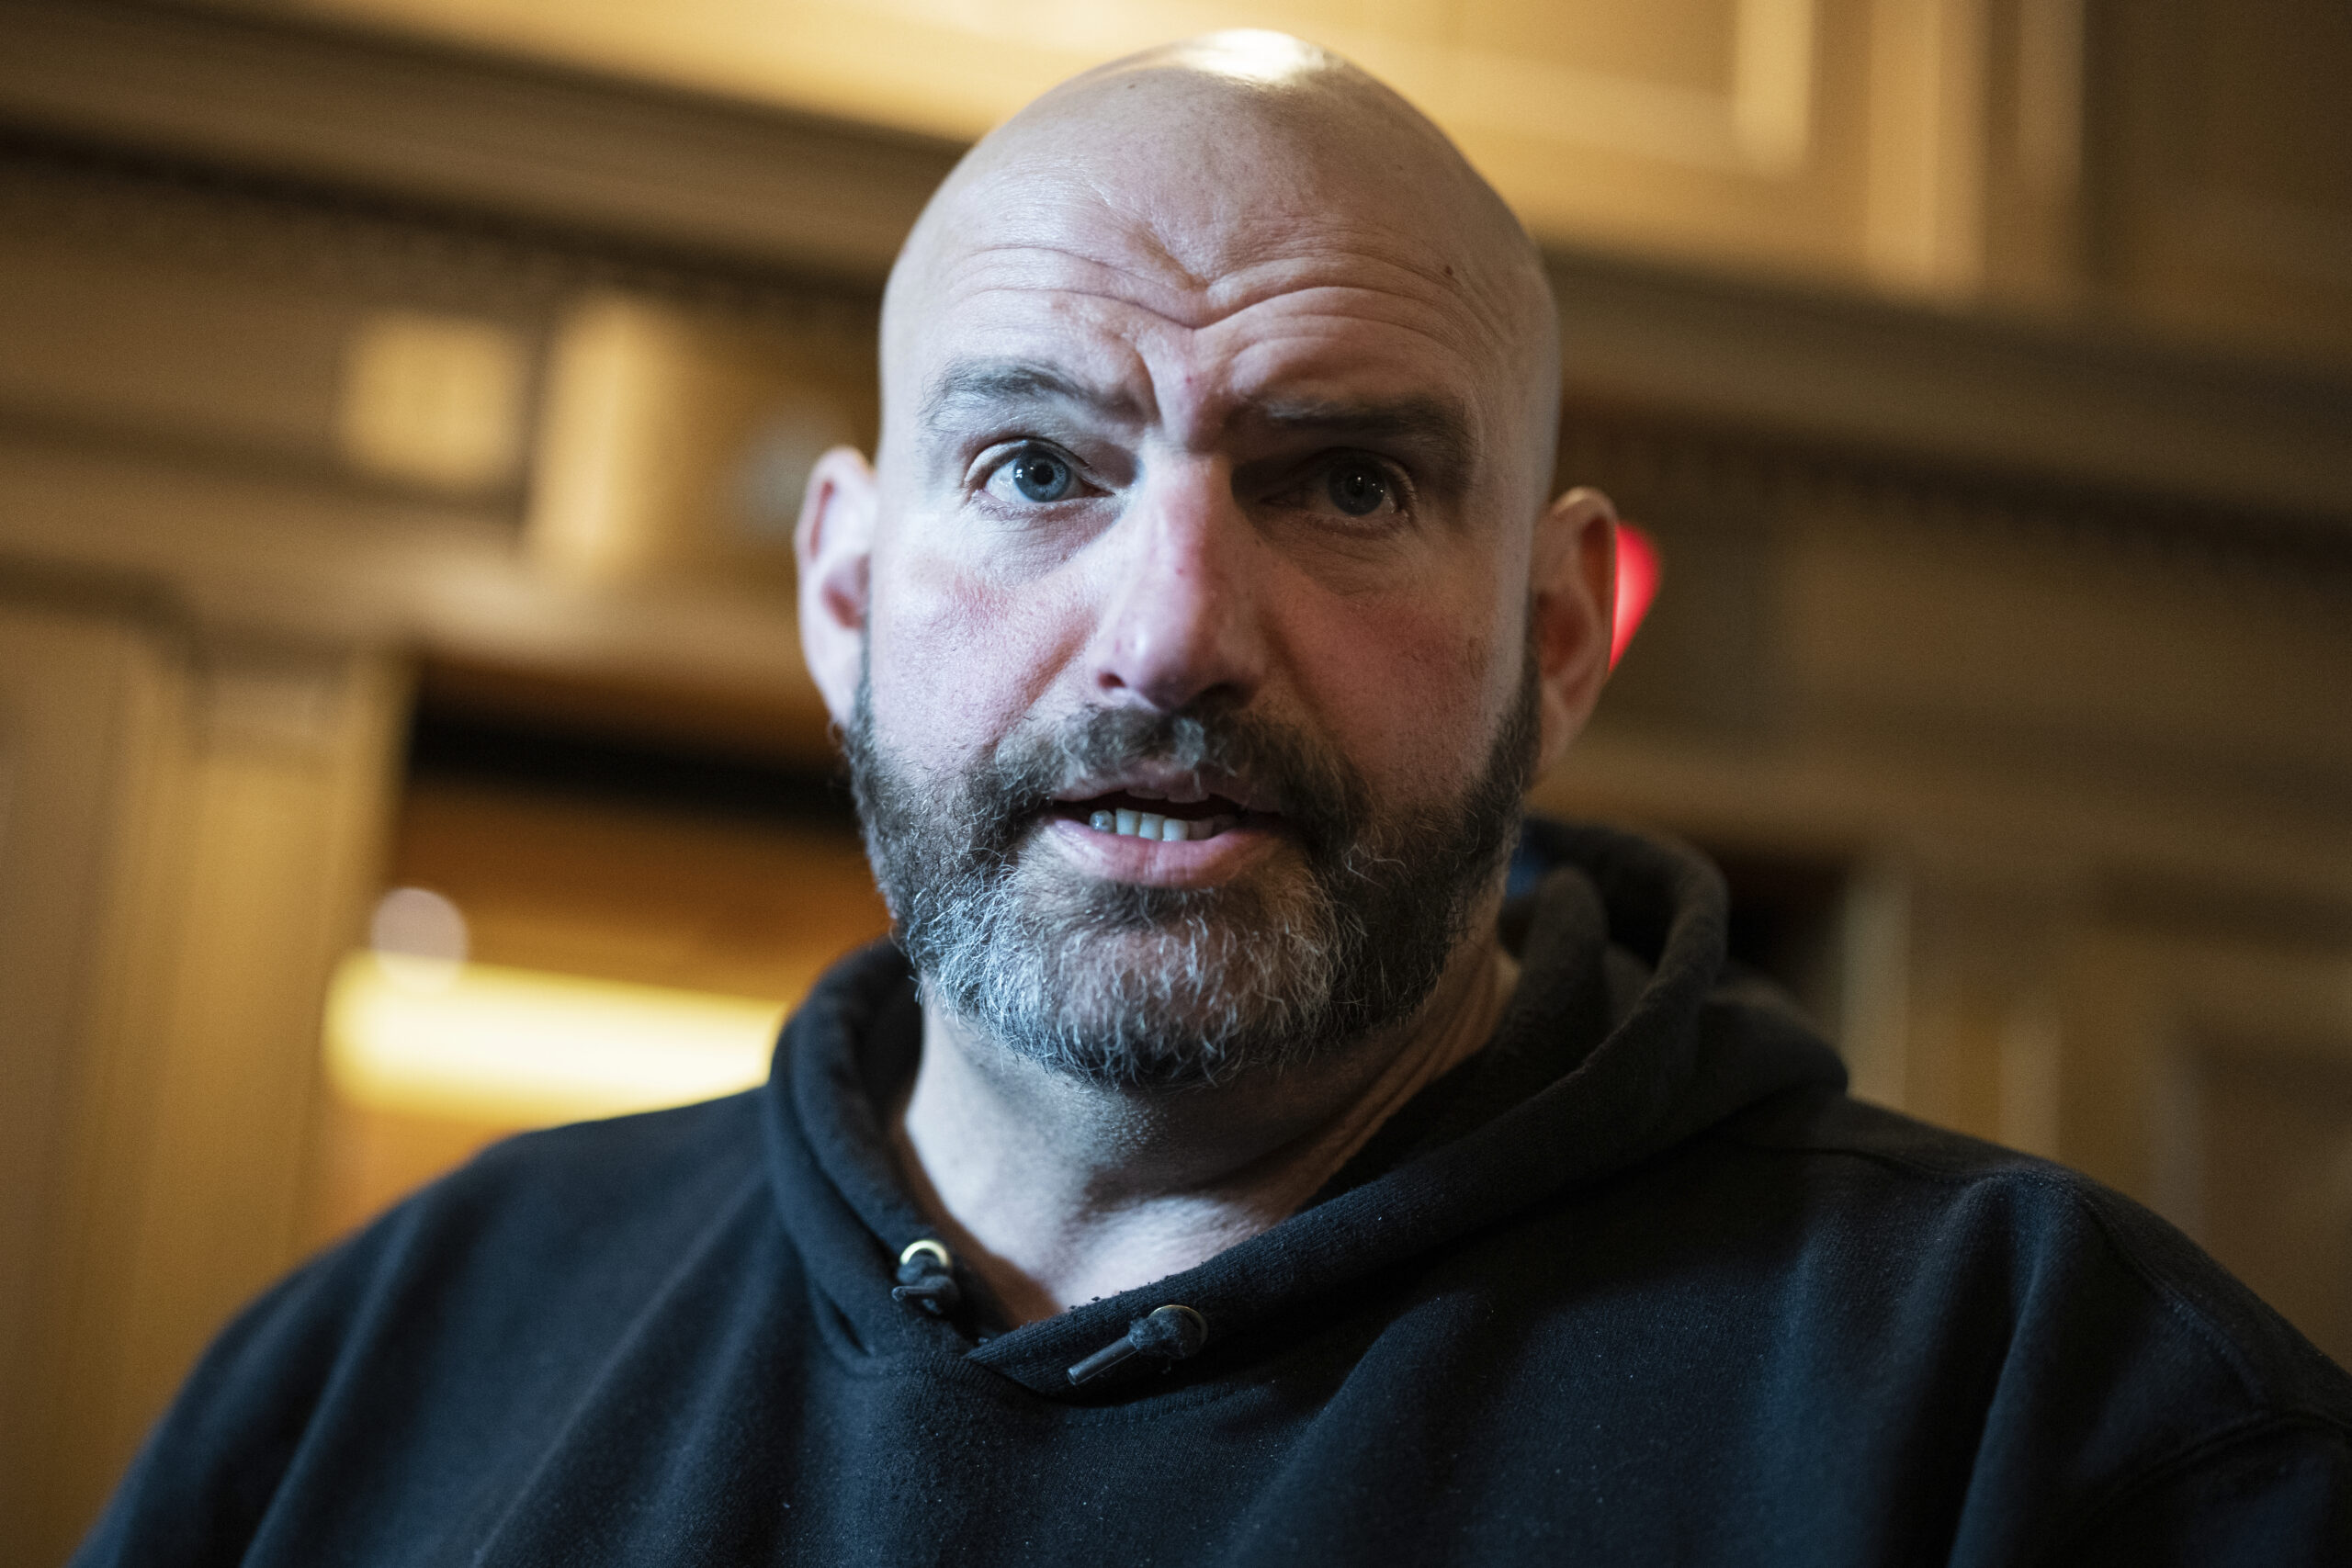 John Fetterman Mocks Pro-Palestinian Protesters After Houthis Offer Support: ‘Might Want To Reevaluate Things’